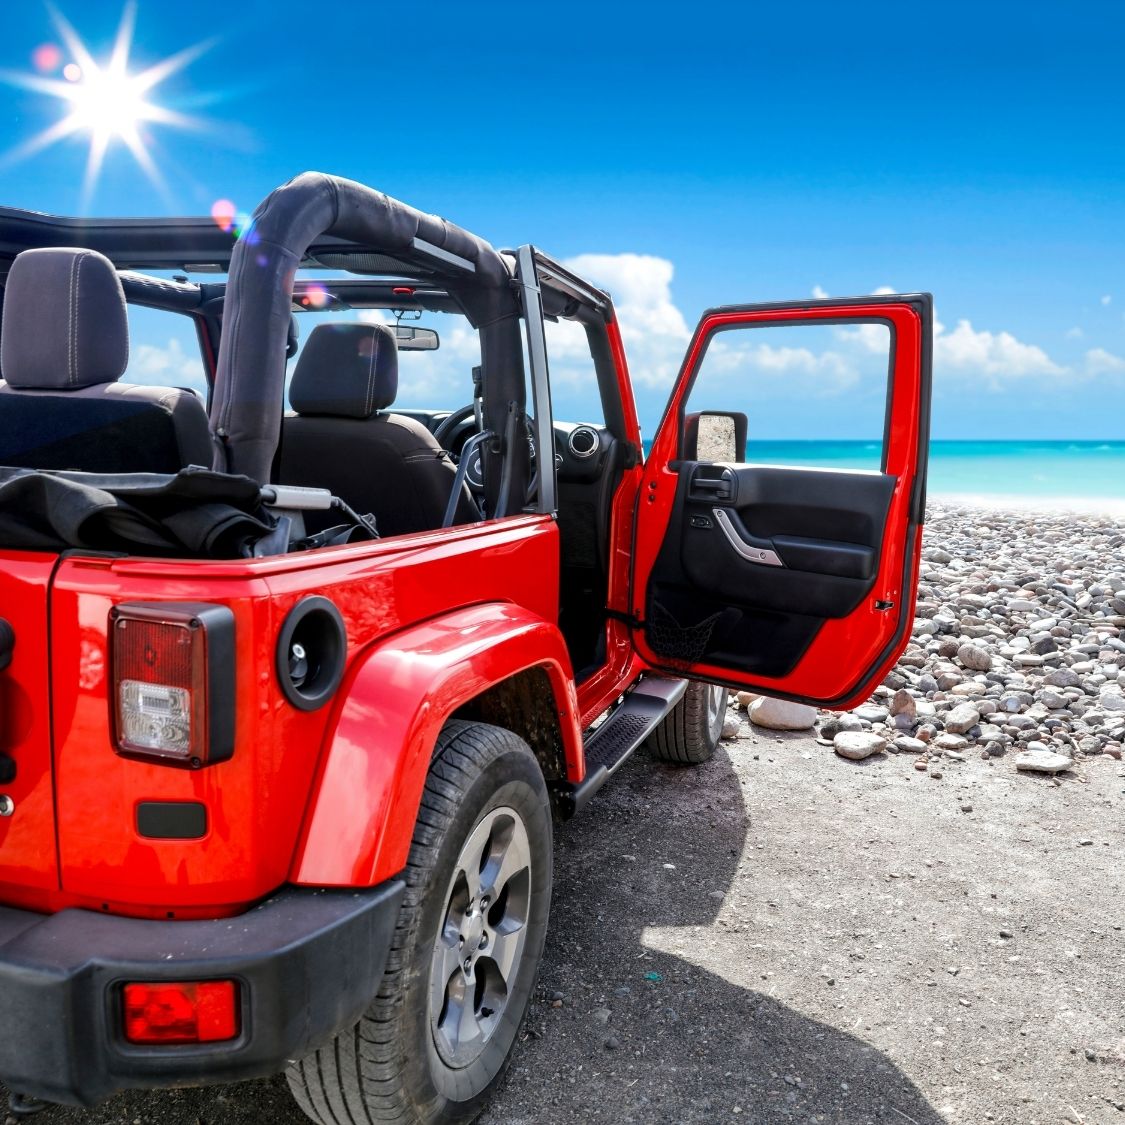 Fun Things To Do With Your Jeep in the Summer